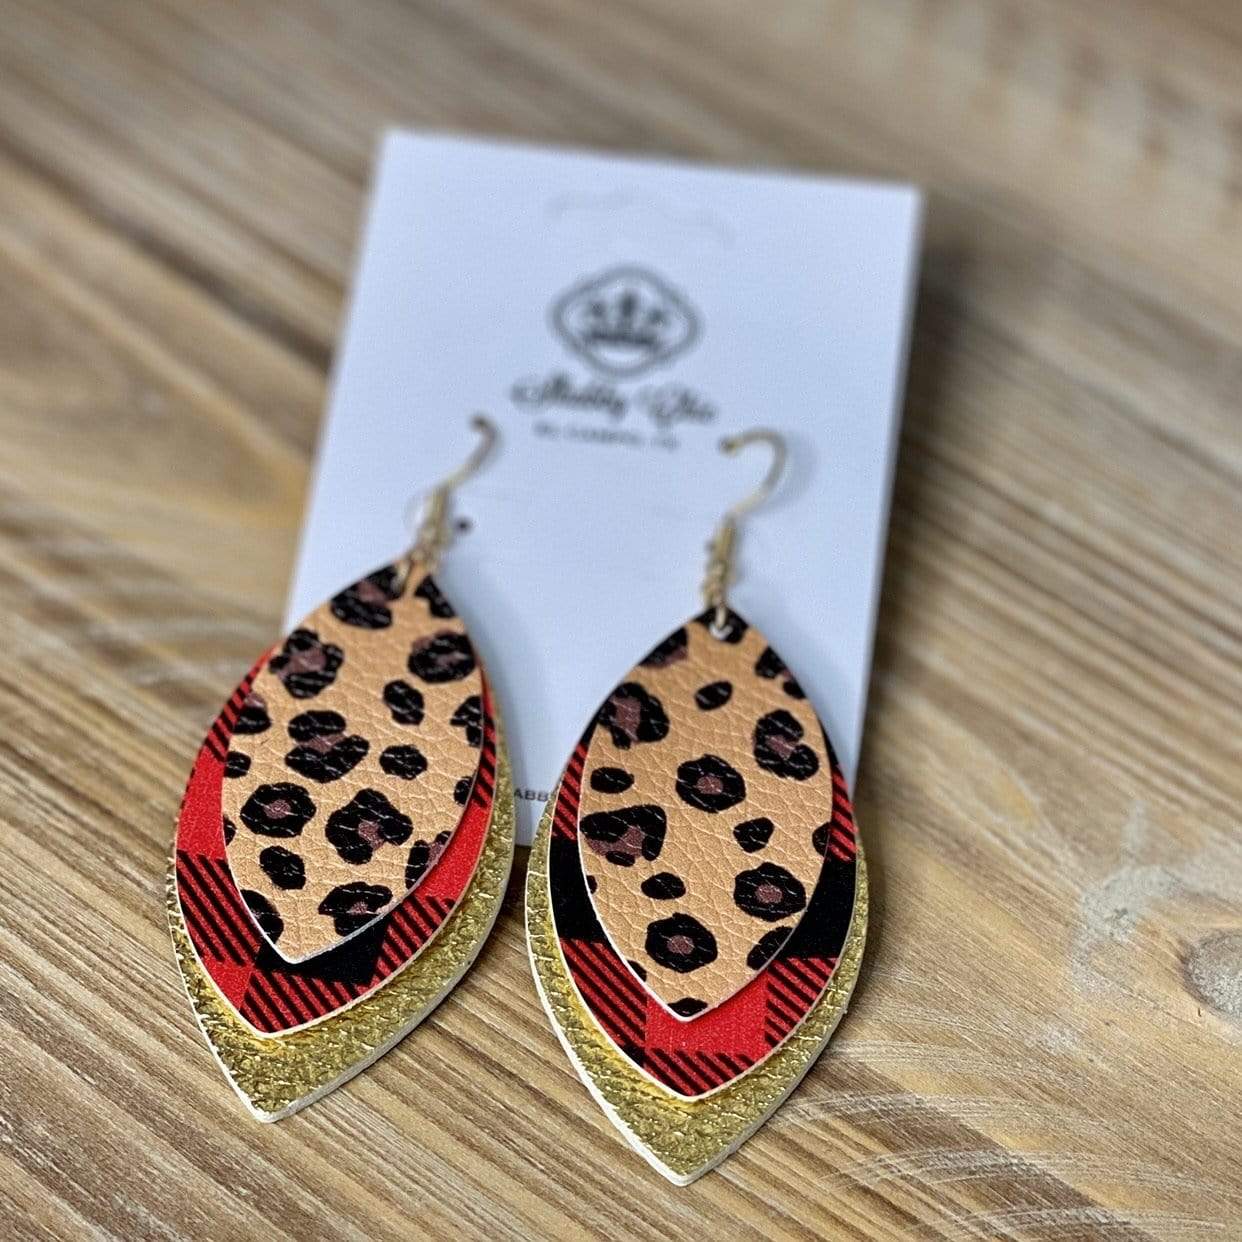 Leopard, Buffalo Plaid and Gold earrings Shabby Chic Boutique and Tanning Salon